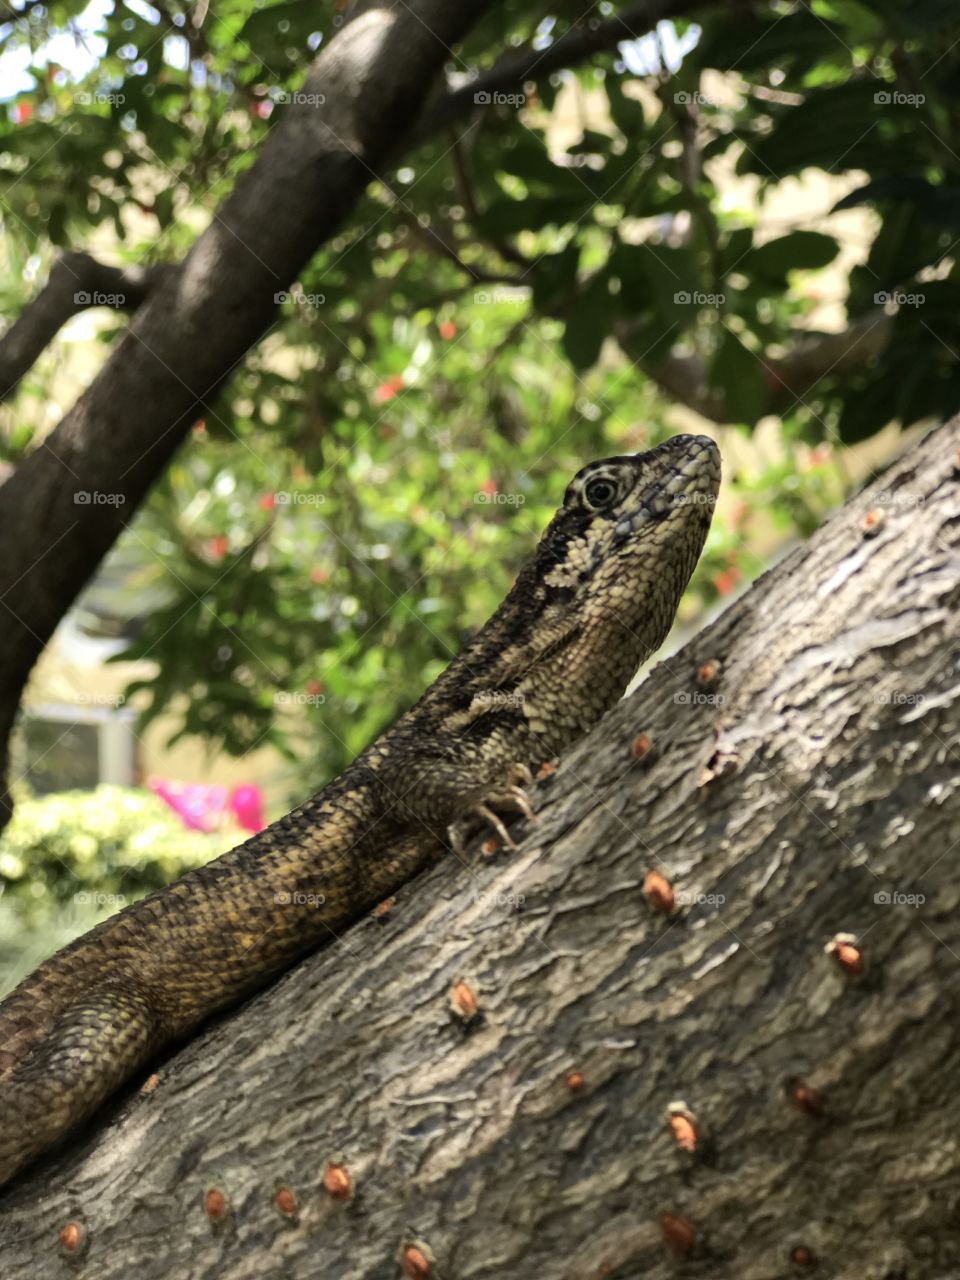 A Bahamian lizard sitting on a tree branch getting some sun. 